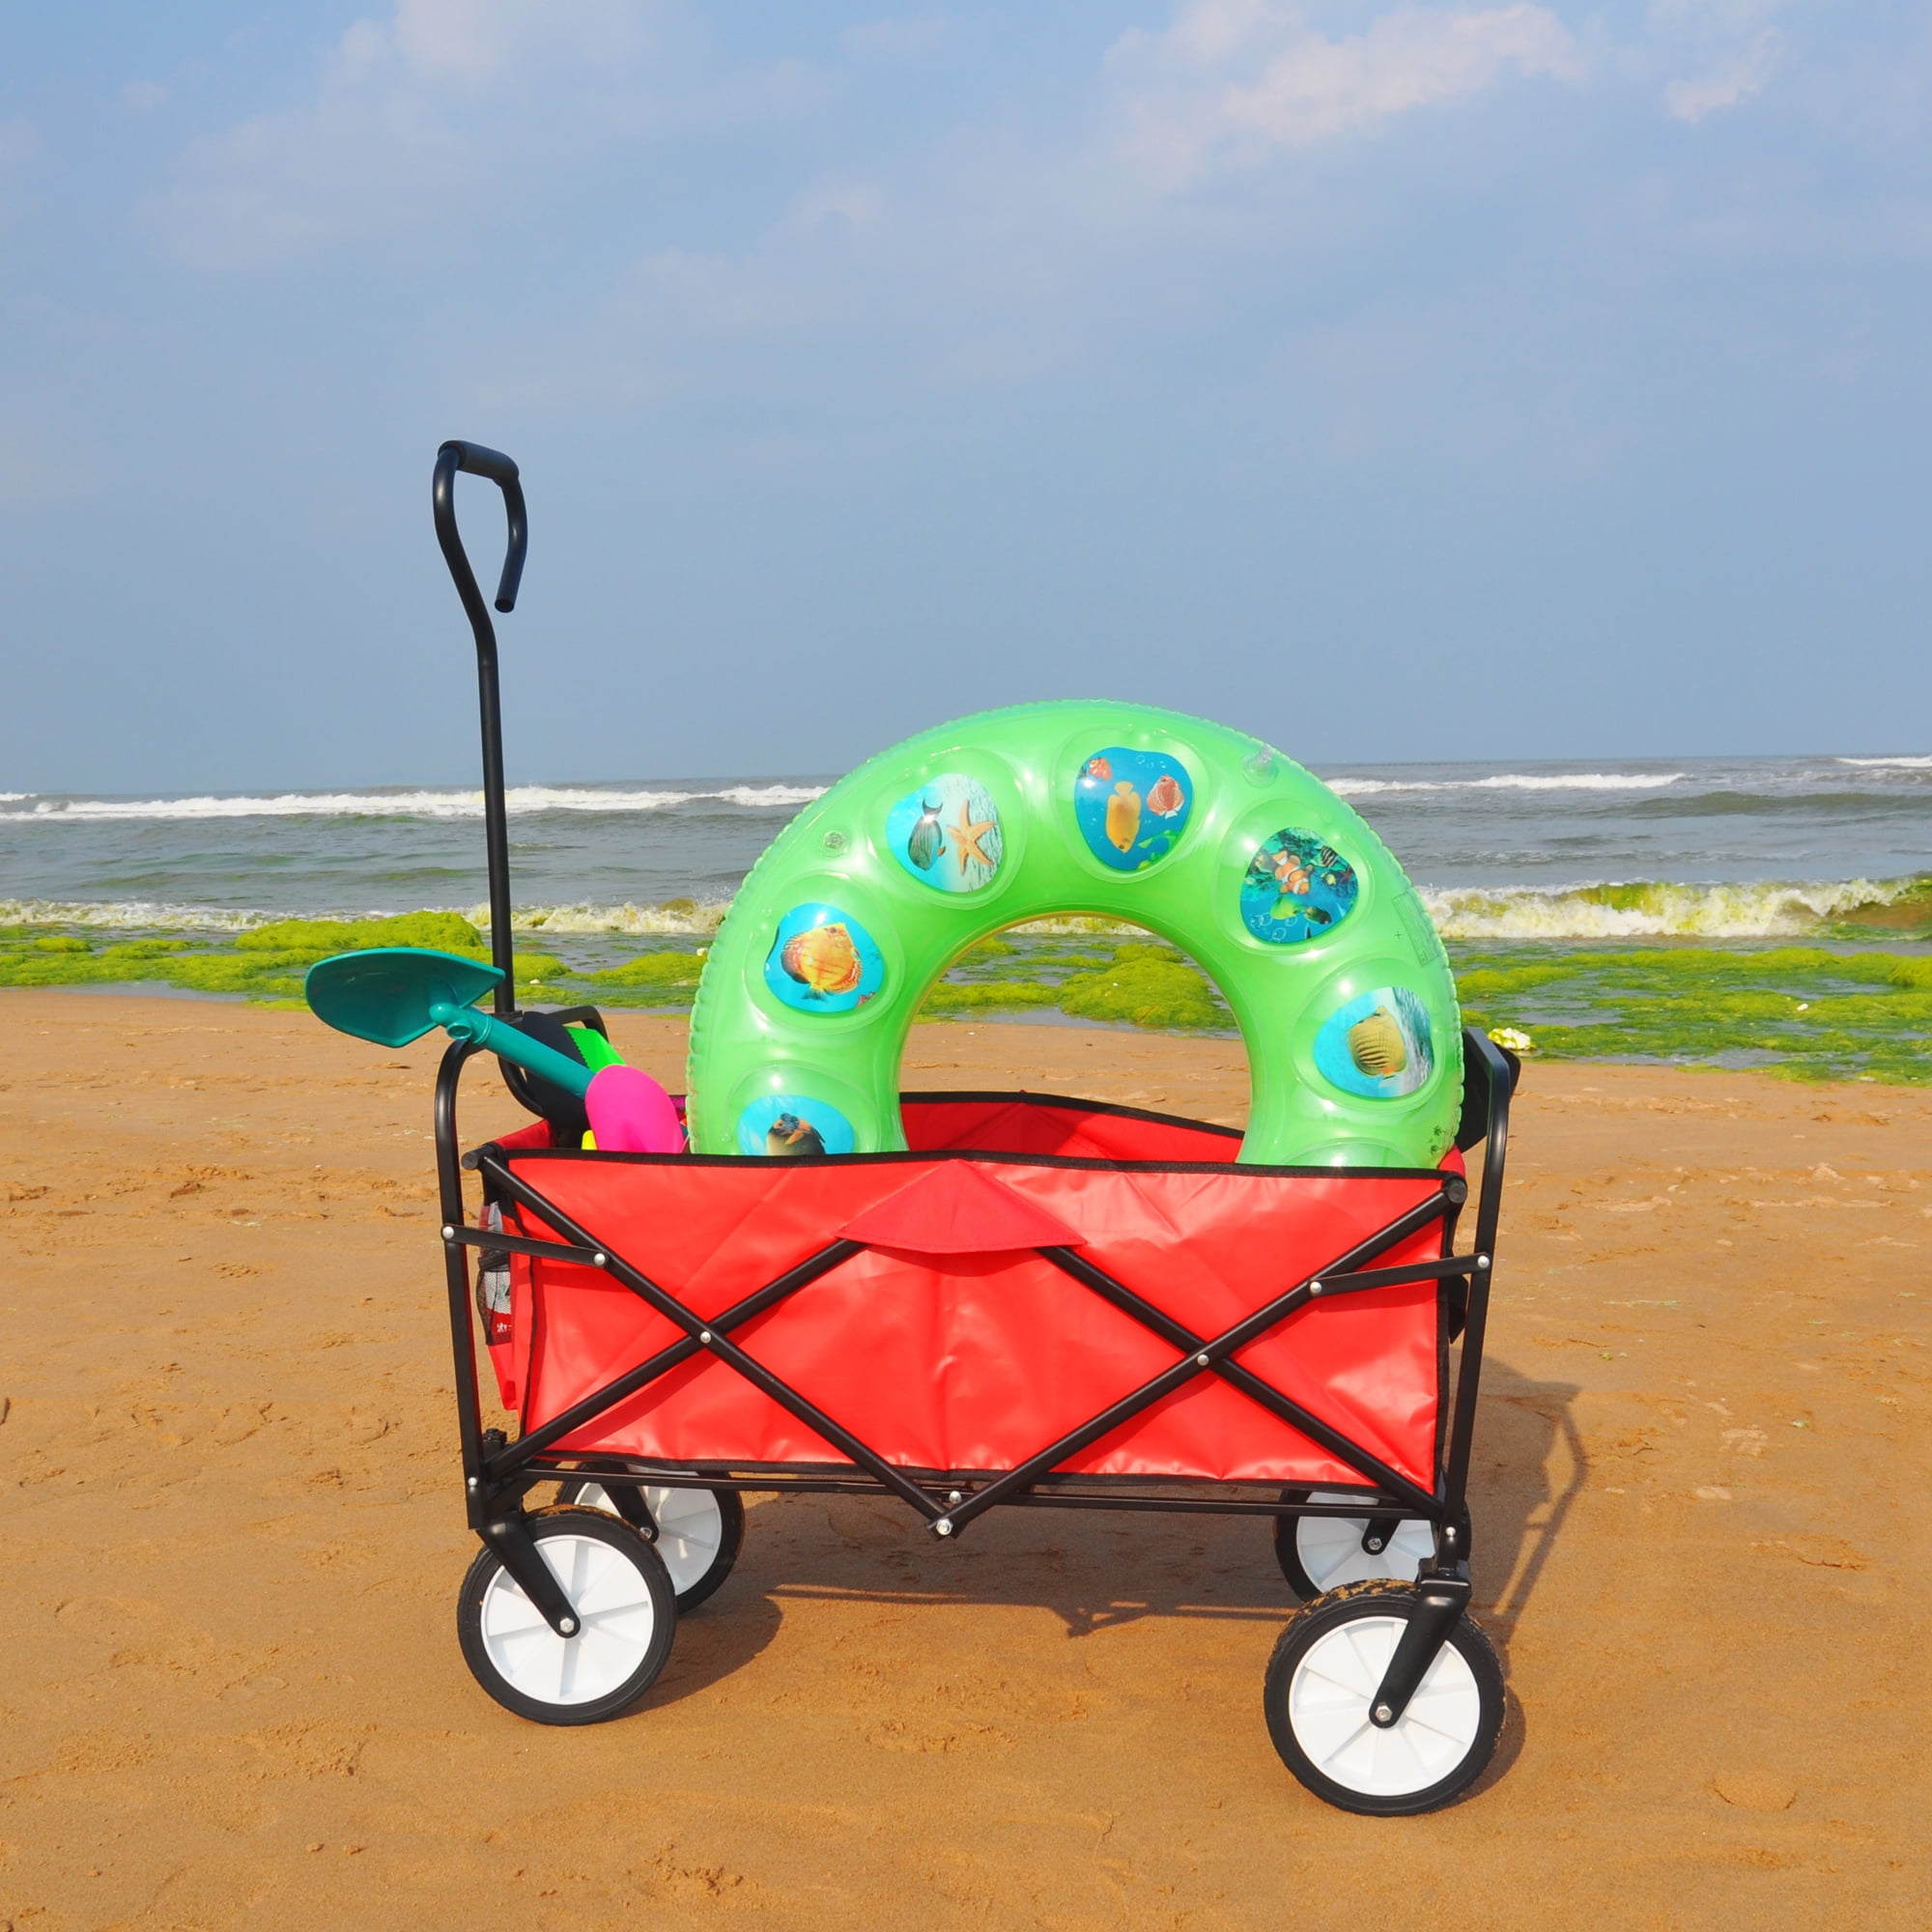  Polar Aurora Fishing Cart Beach Cart Collapsible Wagon w/11''  All-Terrain Wheels for Sand, Heavy Duty Garden Cart with Rod  Holders,Umbrella Holder and Storage Pockets, 550lb Large Capacity : Patio,  Lawn 